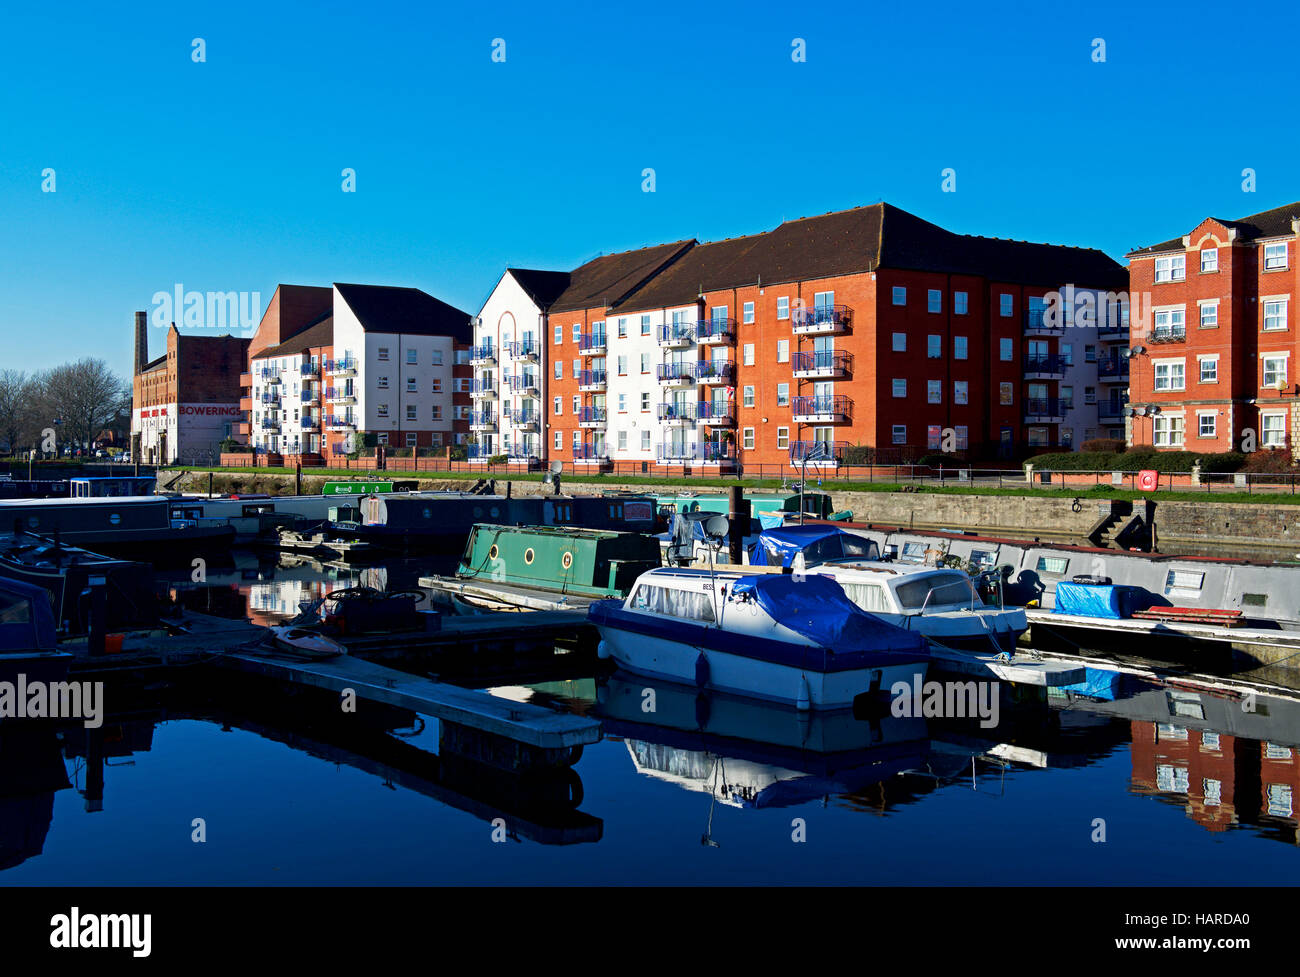 Apartments overlooking the canal basin of the Bridgwater and Taunton Canal, Bridgwater, Somerset, England UK Stock Photo